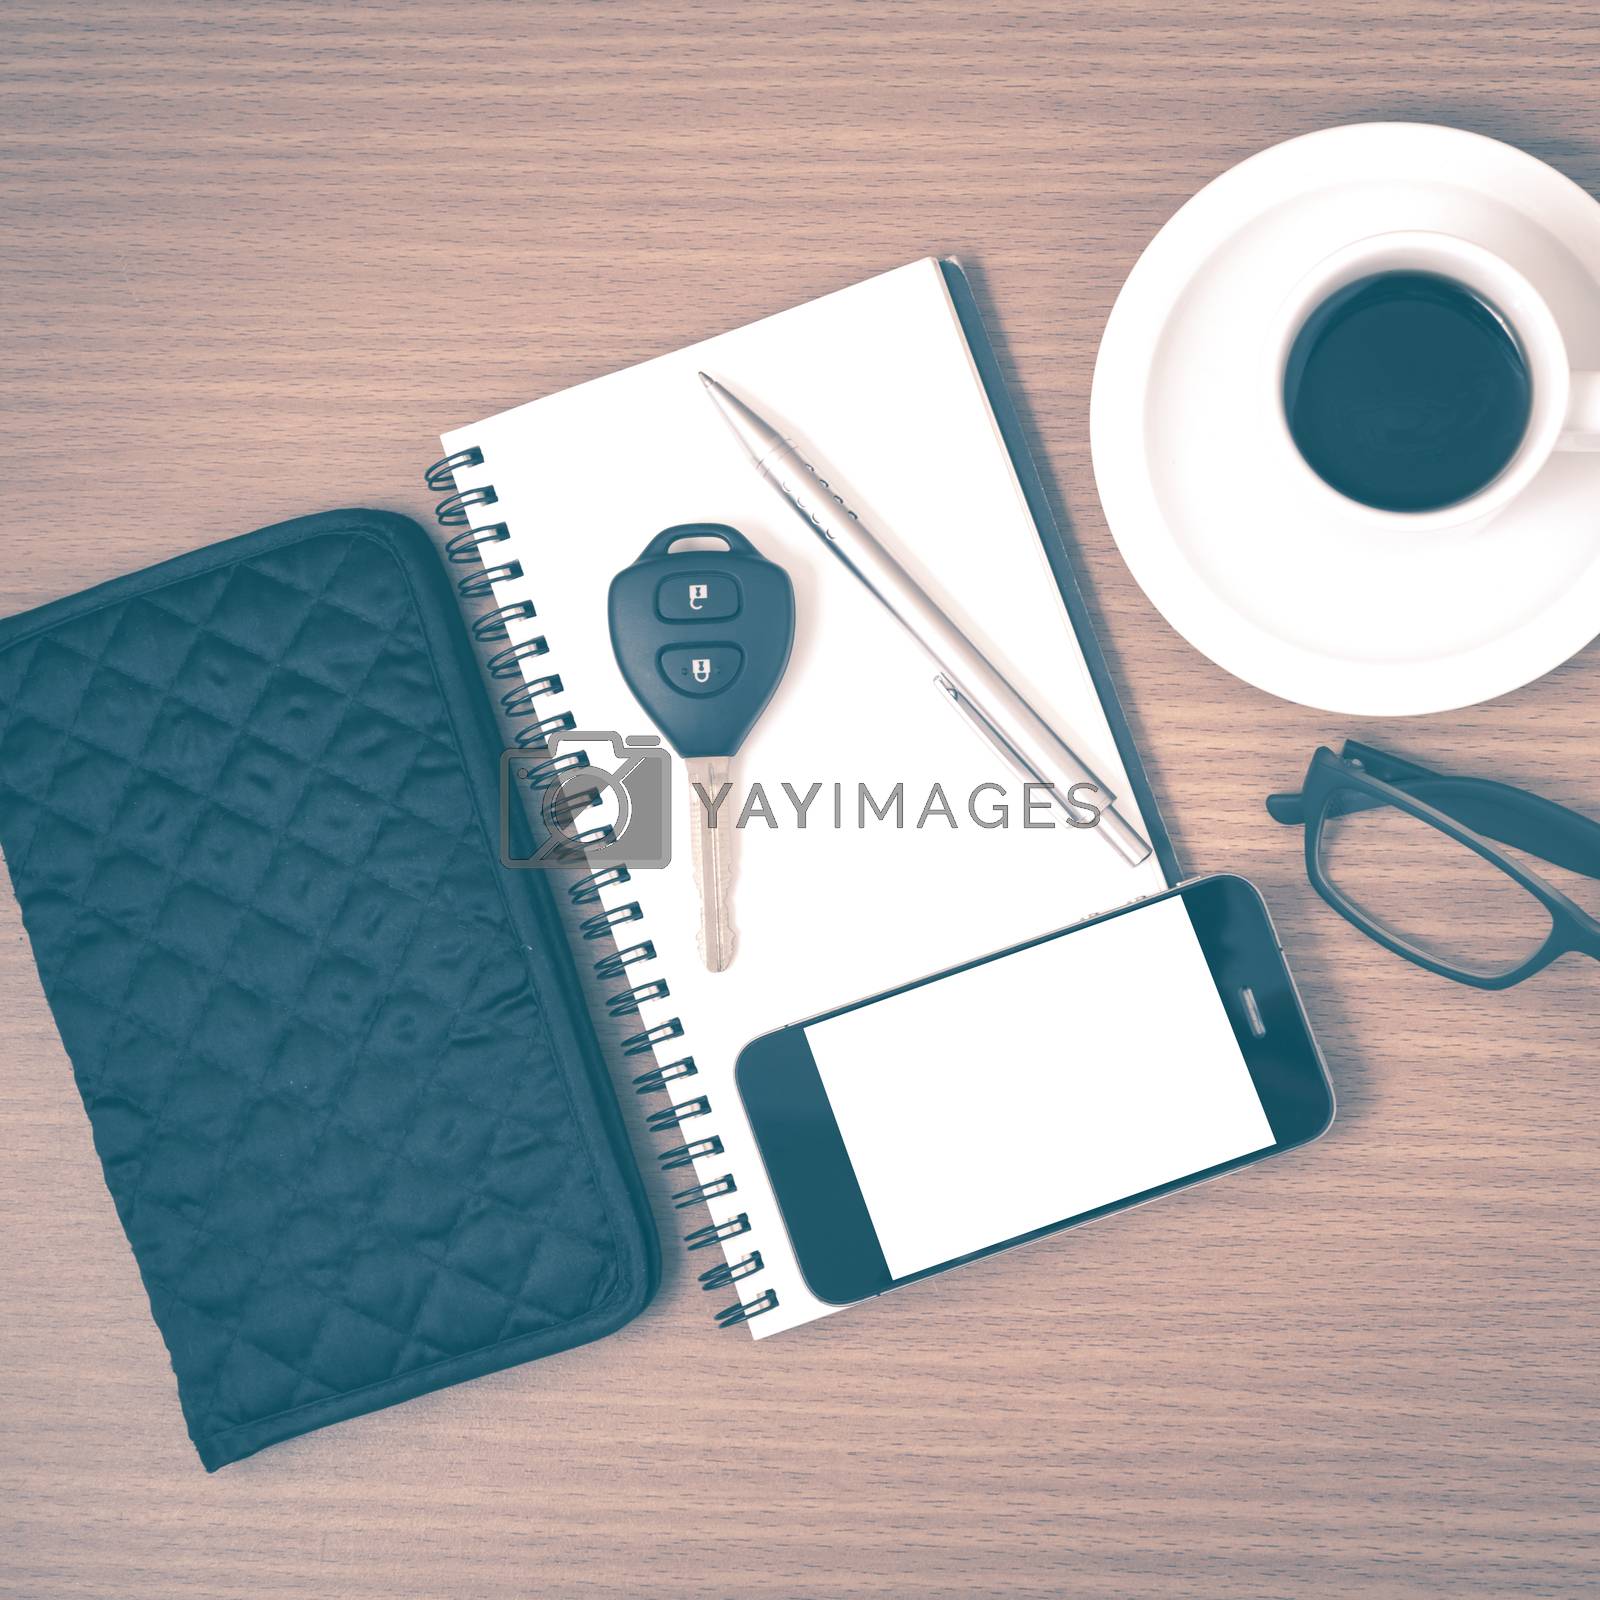 Royalty free image of coffee and phone with notepad,car key,eyeglasses and wallet vint by ammza12